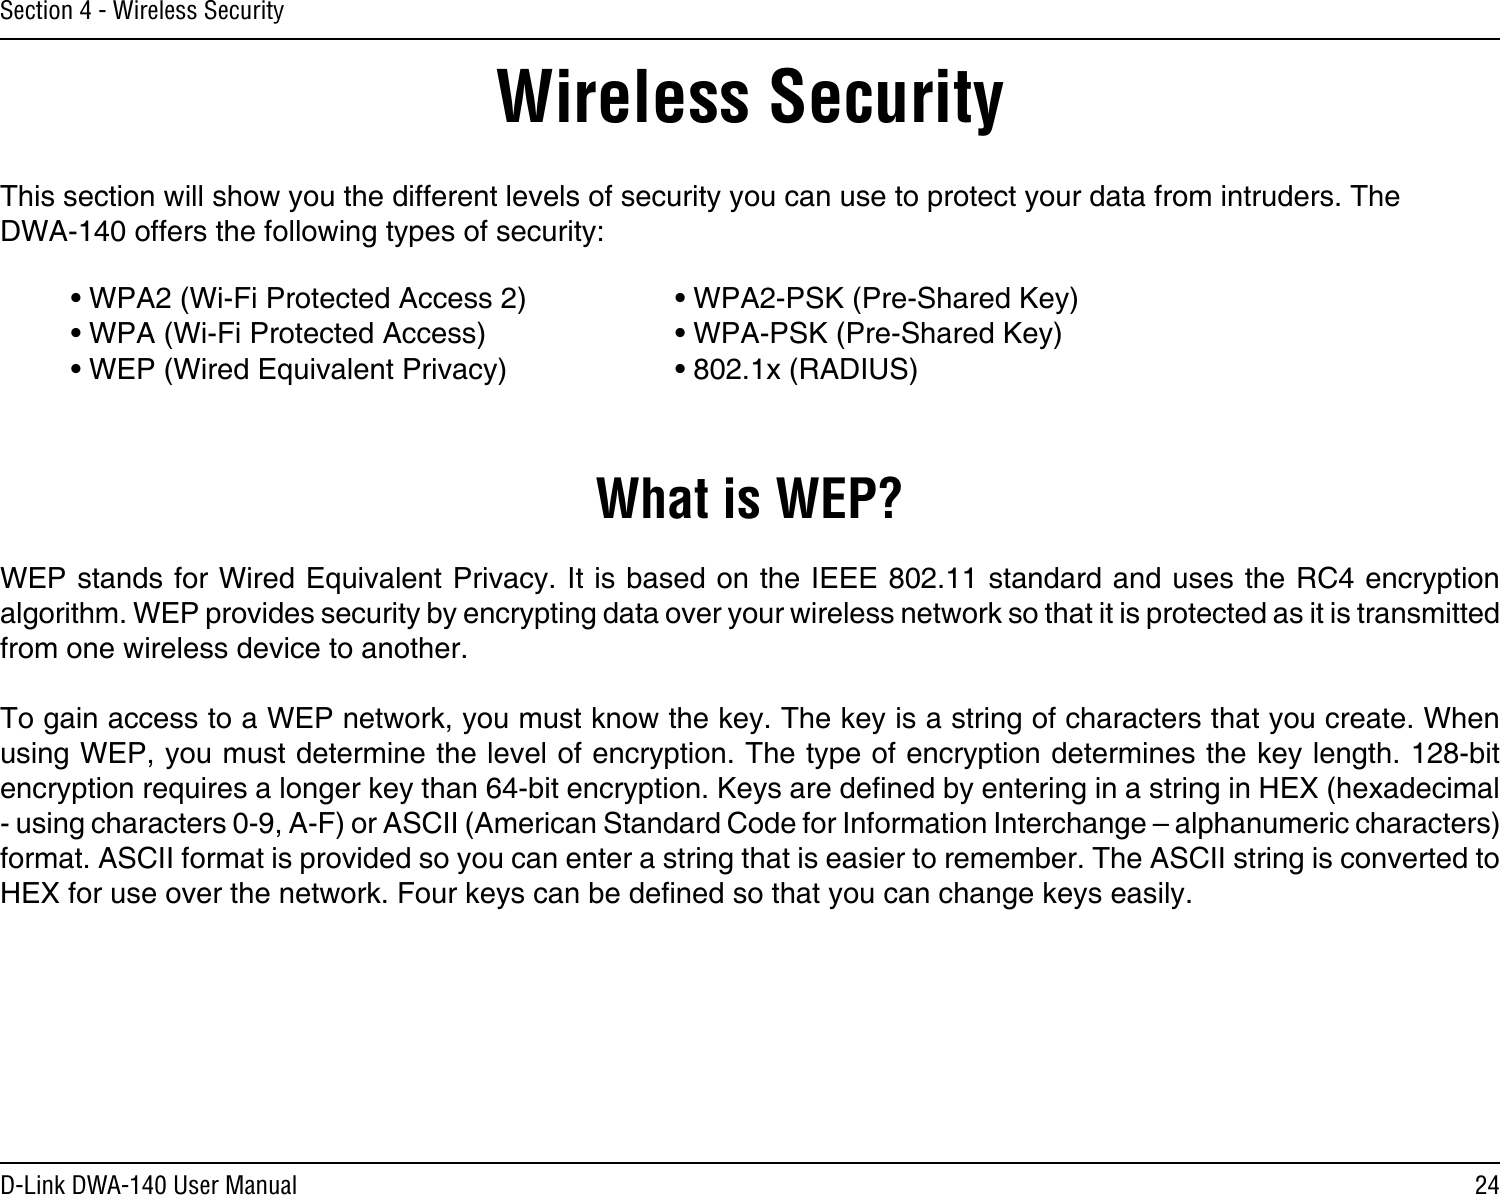 24D-Link DWA-140 User ManualSection 4 - Wireless SecurityWireless SecurityThis section will show you the different levels of security you can use to protect your data from intruders. The DWA-140 offers the following types of security:• WPA2 (Wi-Fi Protected Access 2)     • WPA2-PSK (Pre-Shared Key)• WPA (Wi-Fi Protected Access)      • WPA-PSK (Pre-Shared Key)• WEP (Wired Equivalent Privacy)      • 802.1x (RADIUS)What is WEP?WEP stands for Wired Equivalent Privacy. It is based on the IEEE 802.11 standard and uses the RC4 encryption algorithm. WEP provides security by encrypting data over your wireless network so that it is protected as it is transmitted from one wireless device to another.To gain access to a WEP network, you must know the key. The key is a string of characters that you create. When using WEP, you must determine the level of encryption. The type of encryption determines the key length. 128-bit encryption requires a longer key than 64-bit encryption. Keys are dened by entering in a string in HEX (hexadecimal - using characters 0-9, A-F) or ASCII (American Standard Code for Information Interchange – alphanumeric characters) format. ASCII format is provided so you can enter a string that is easier to remember. The ASCII string is converted to HEX for use over the network. Four keys can be dened so that you can change keys easily.